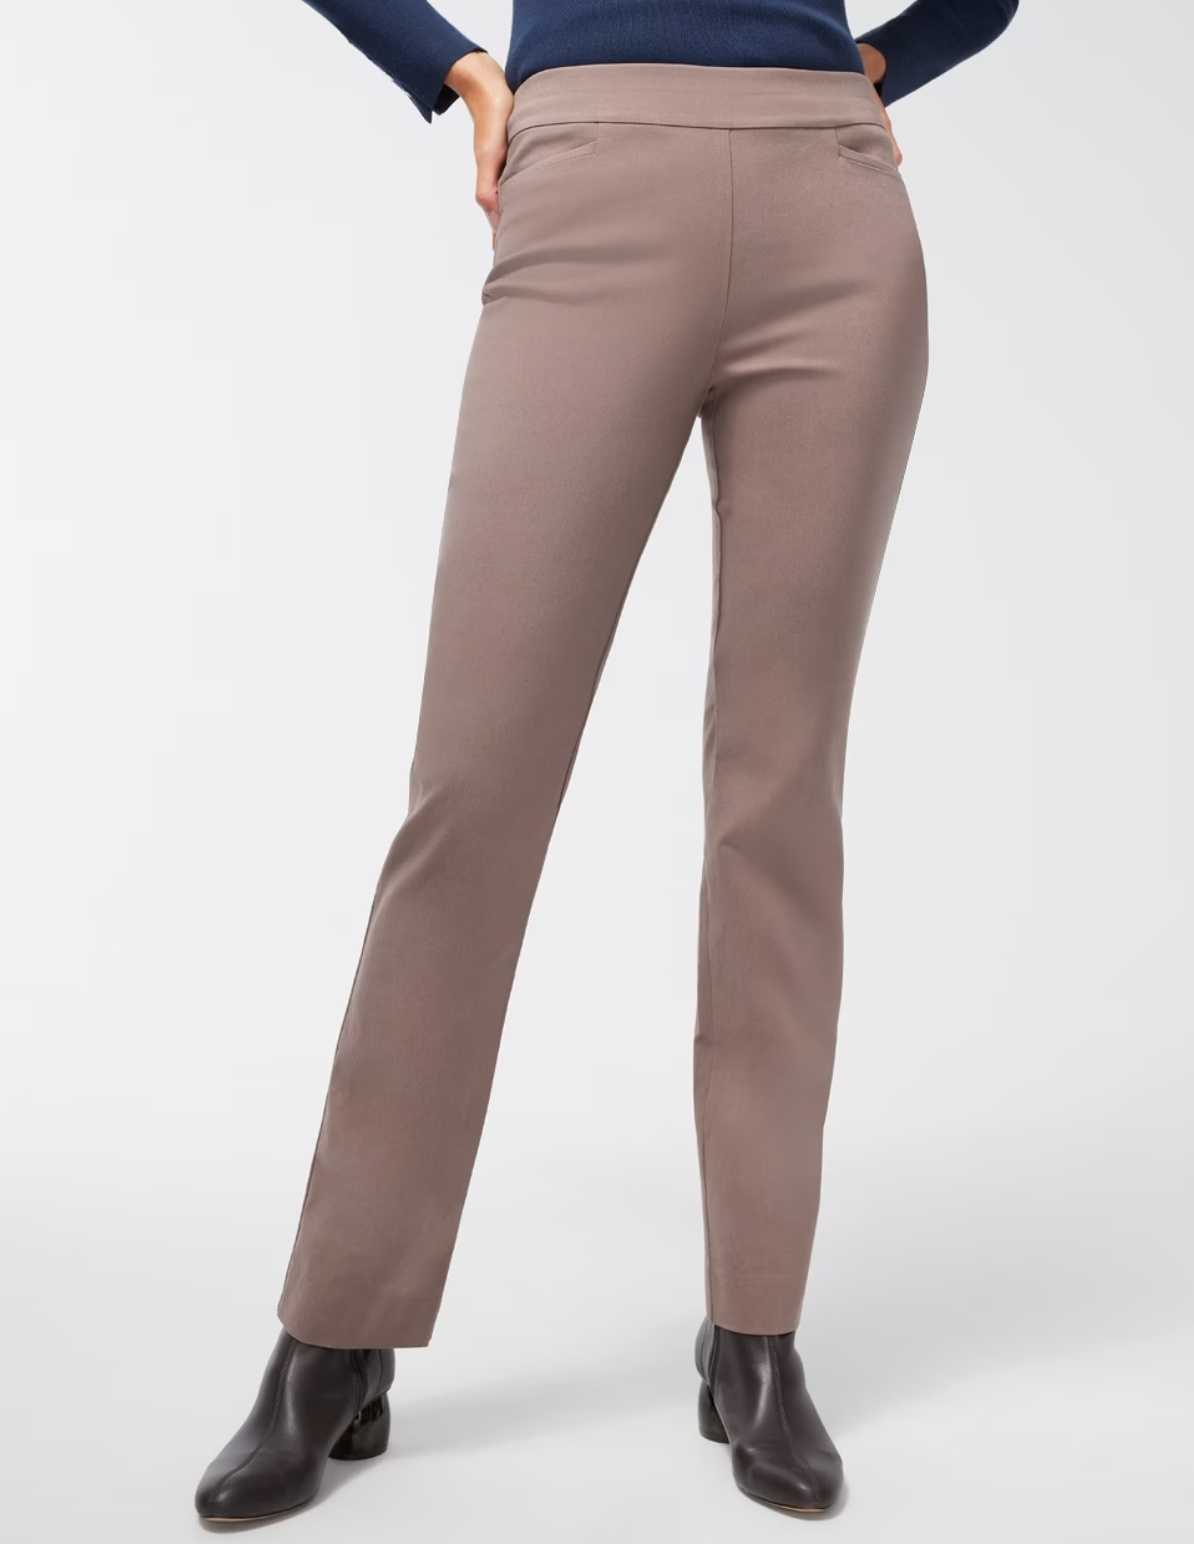 L.L.Bean: Our Bestselling Wrinkle-Free Pants | Milled